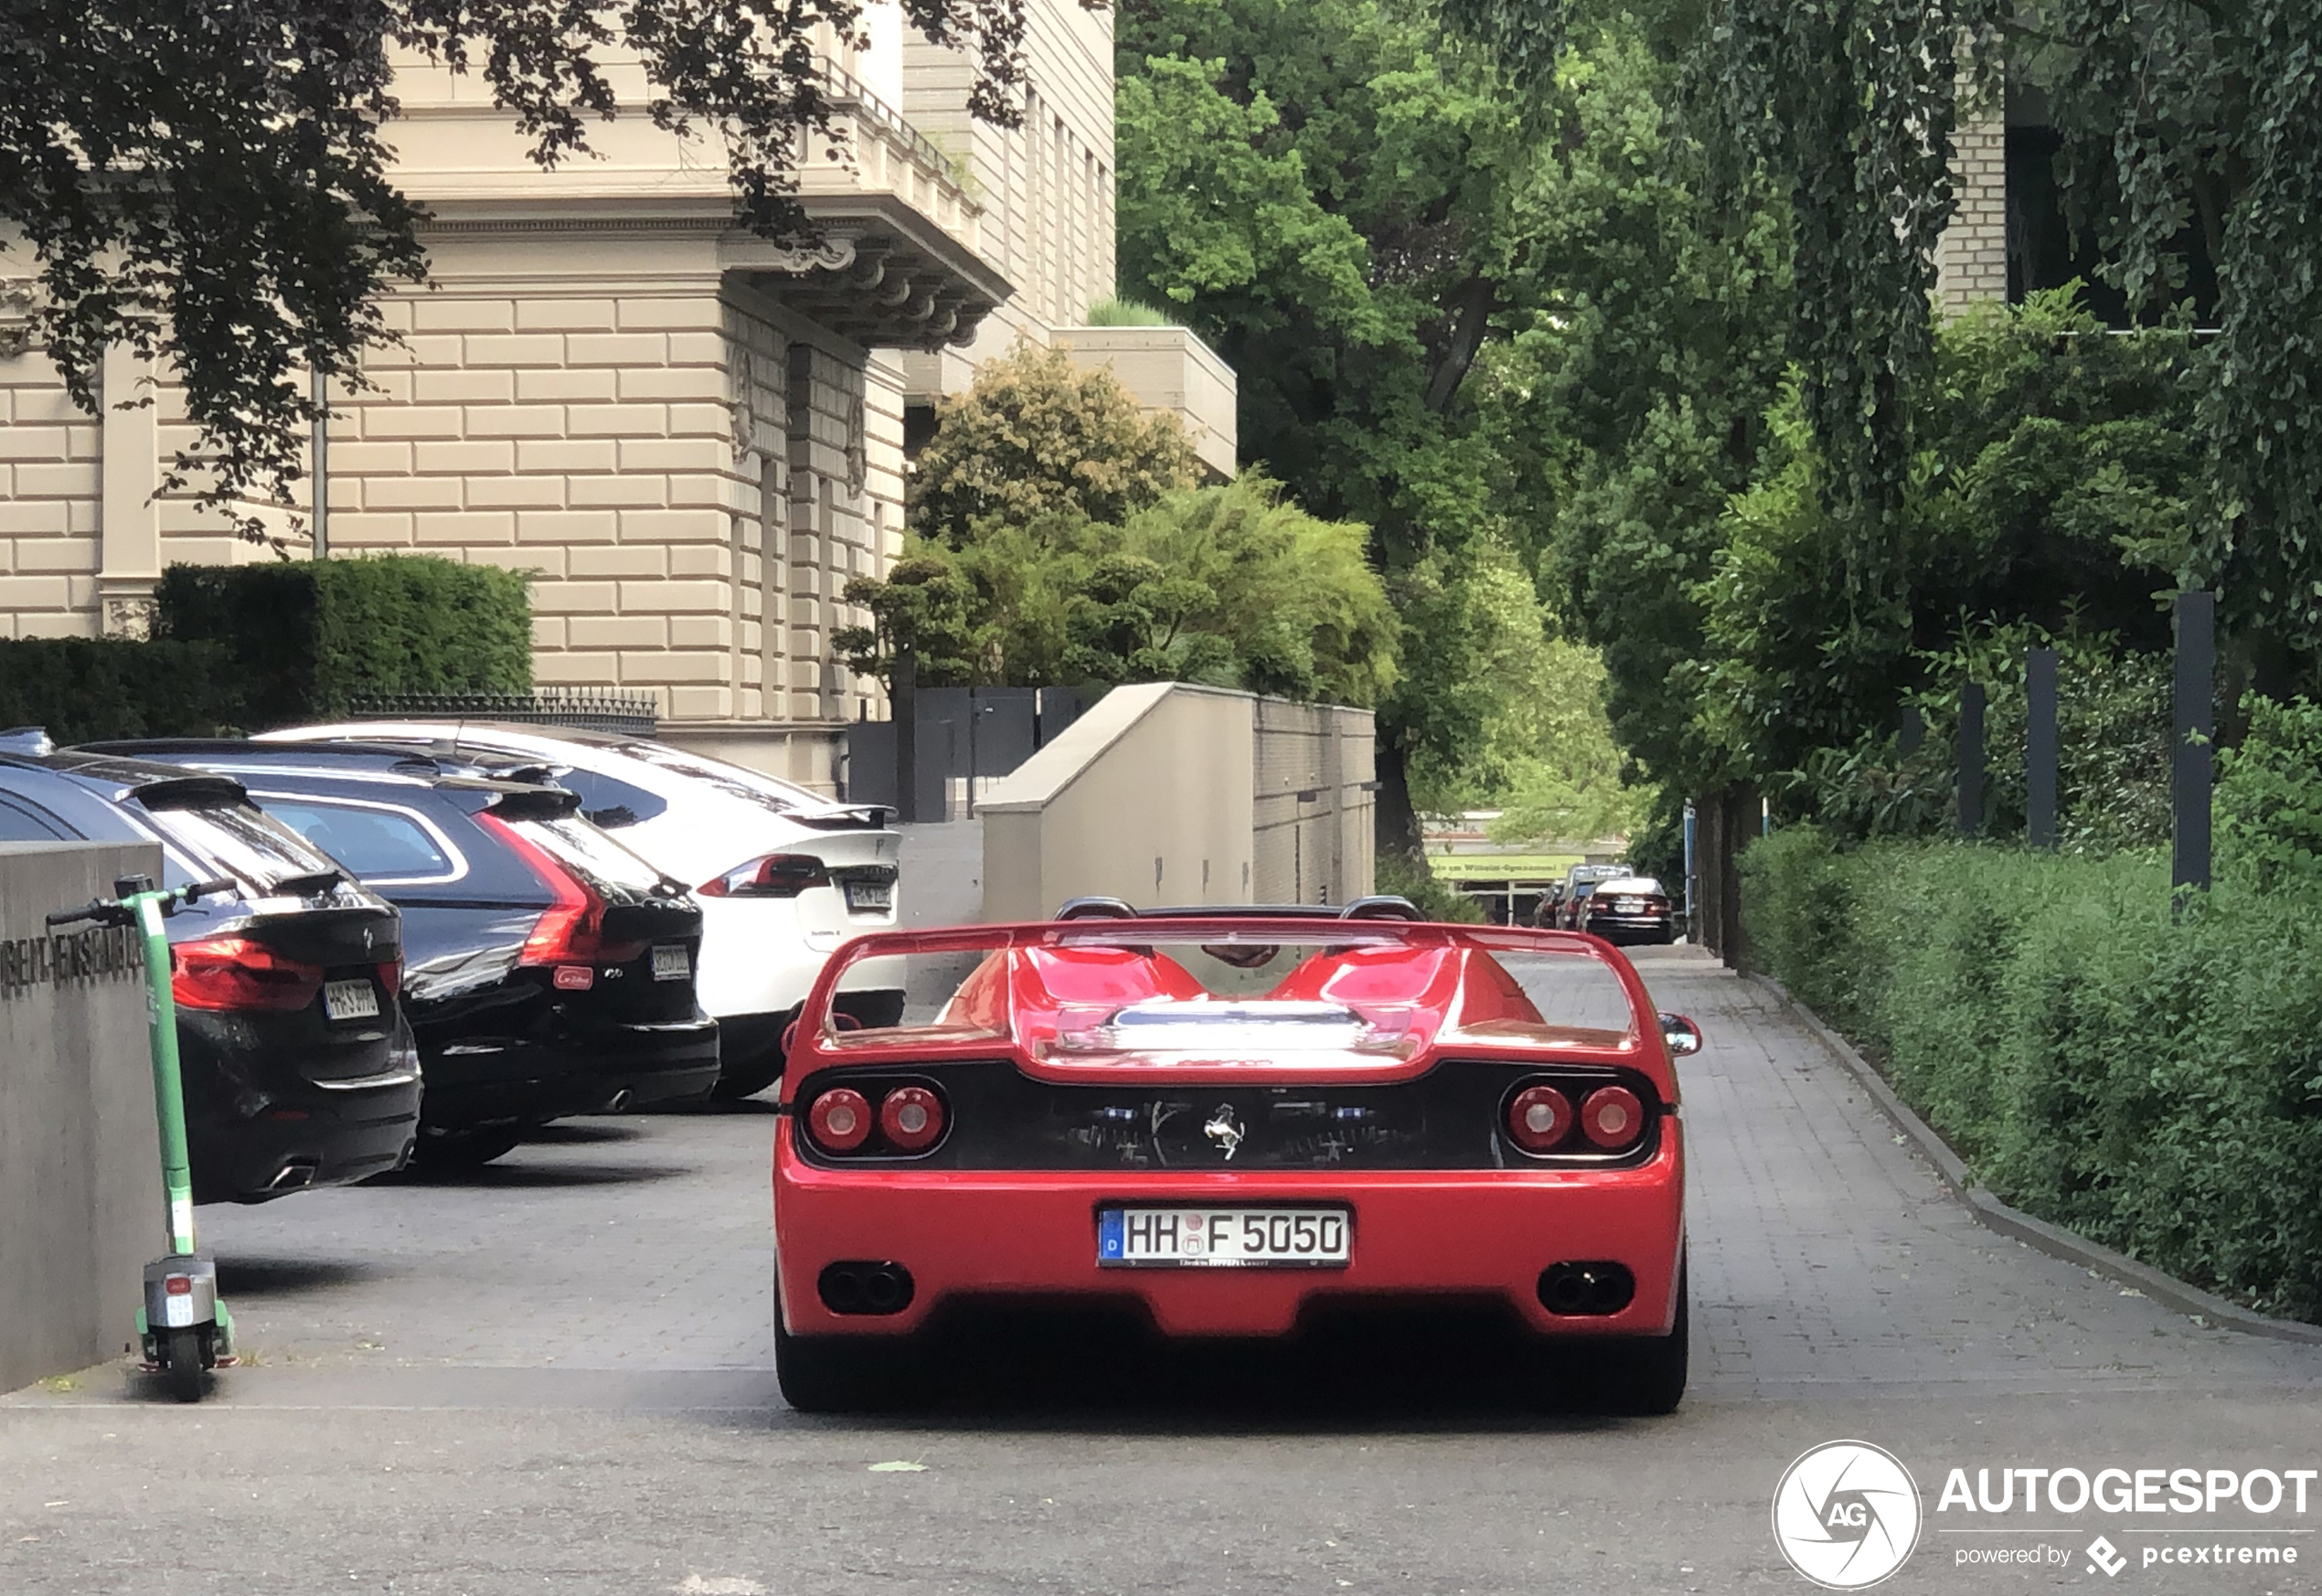 This Ferrari F50 is still in the same hands